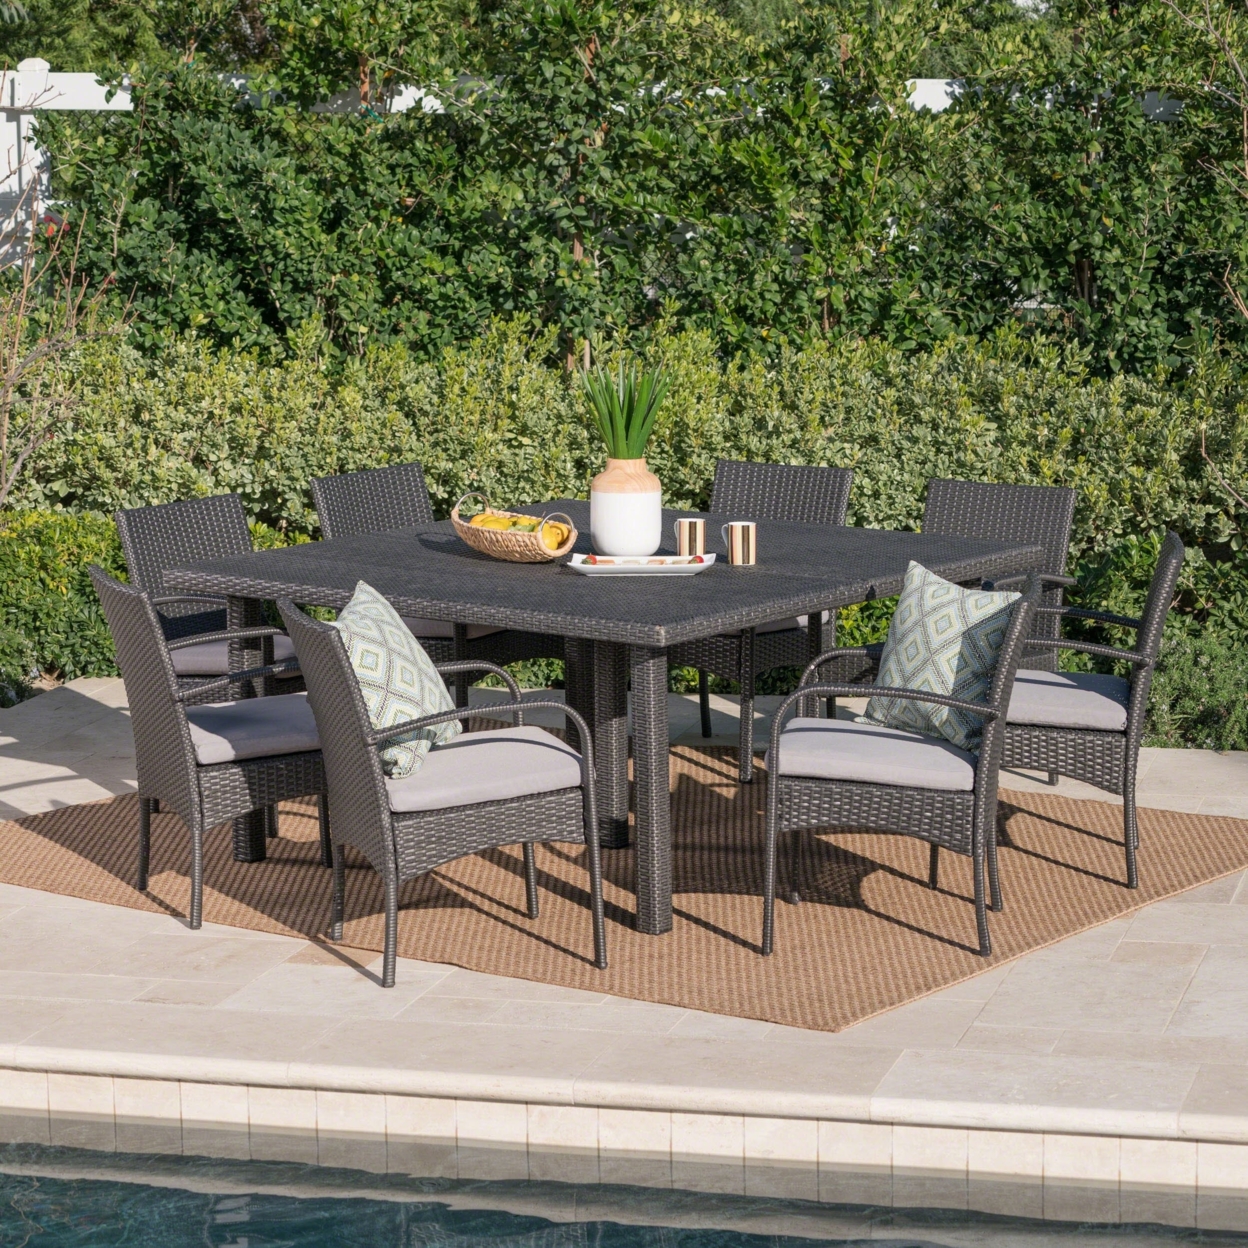 Coral Outdoor 9 Piece Wicker Dining Set With Water Resistant Cushions - Multi-brown/crme